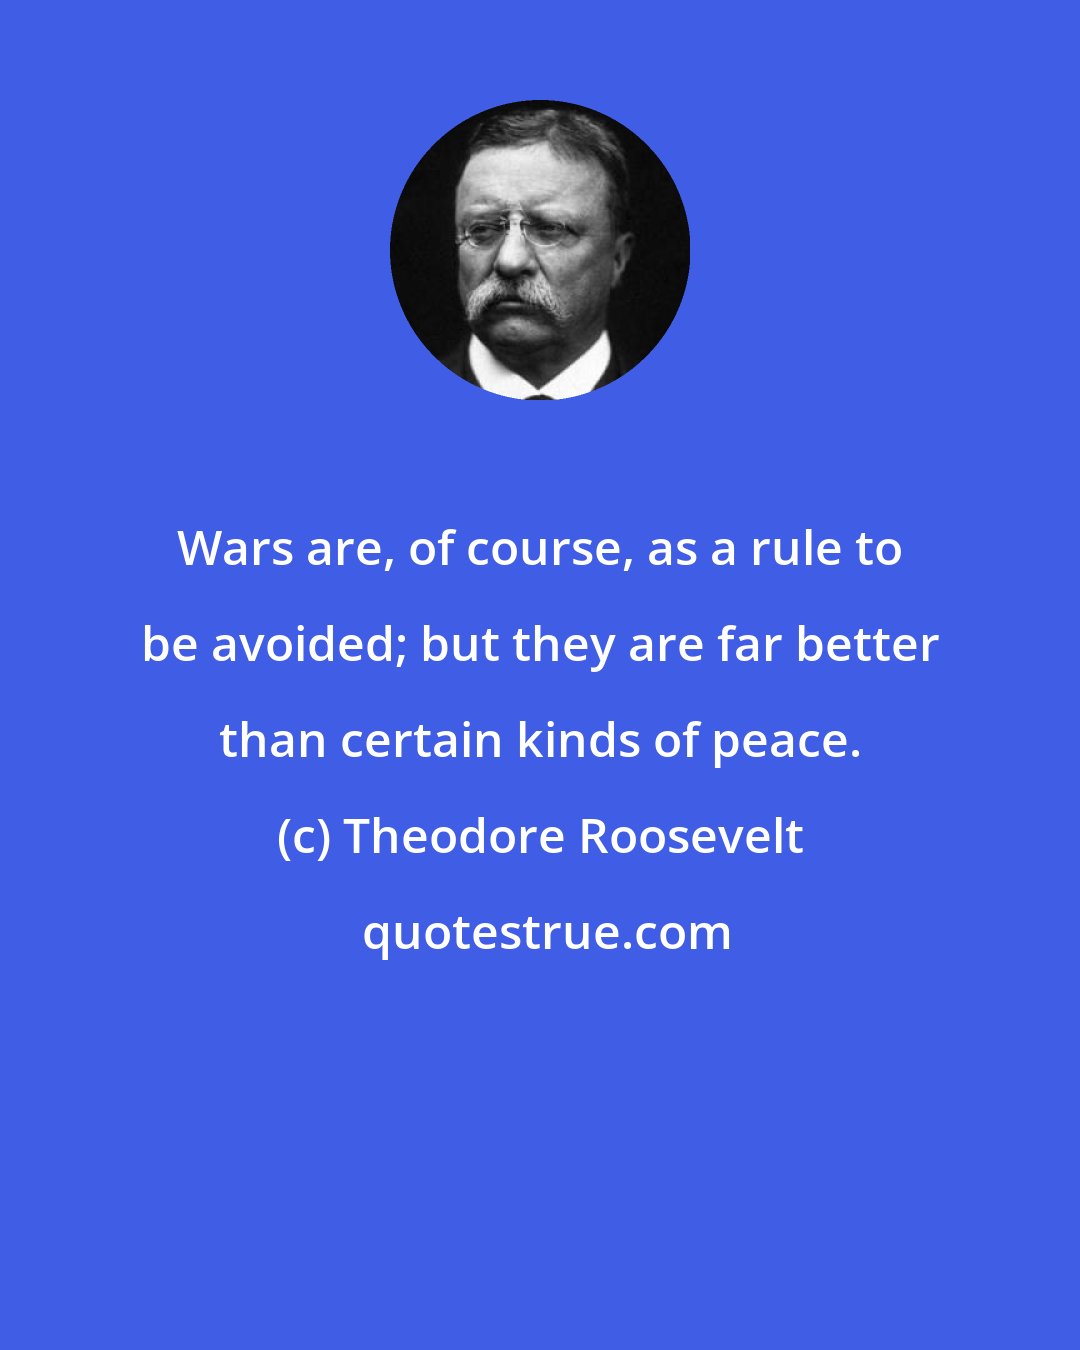 Theodore Roosevelt: Wars are, of course, as a rule to be avoided; but they are far better than certain kinds of peace.